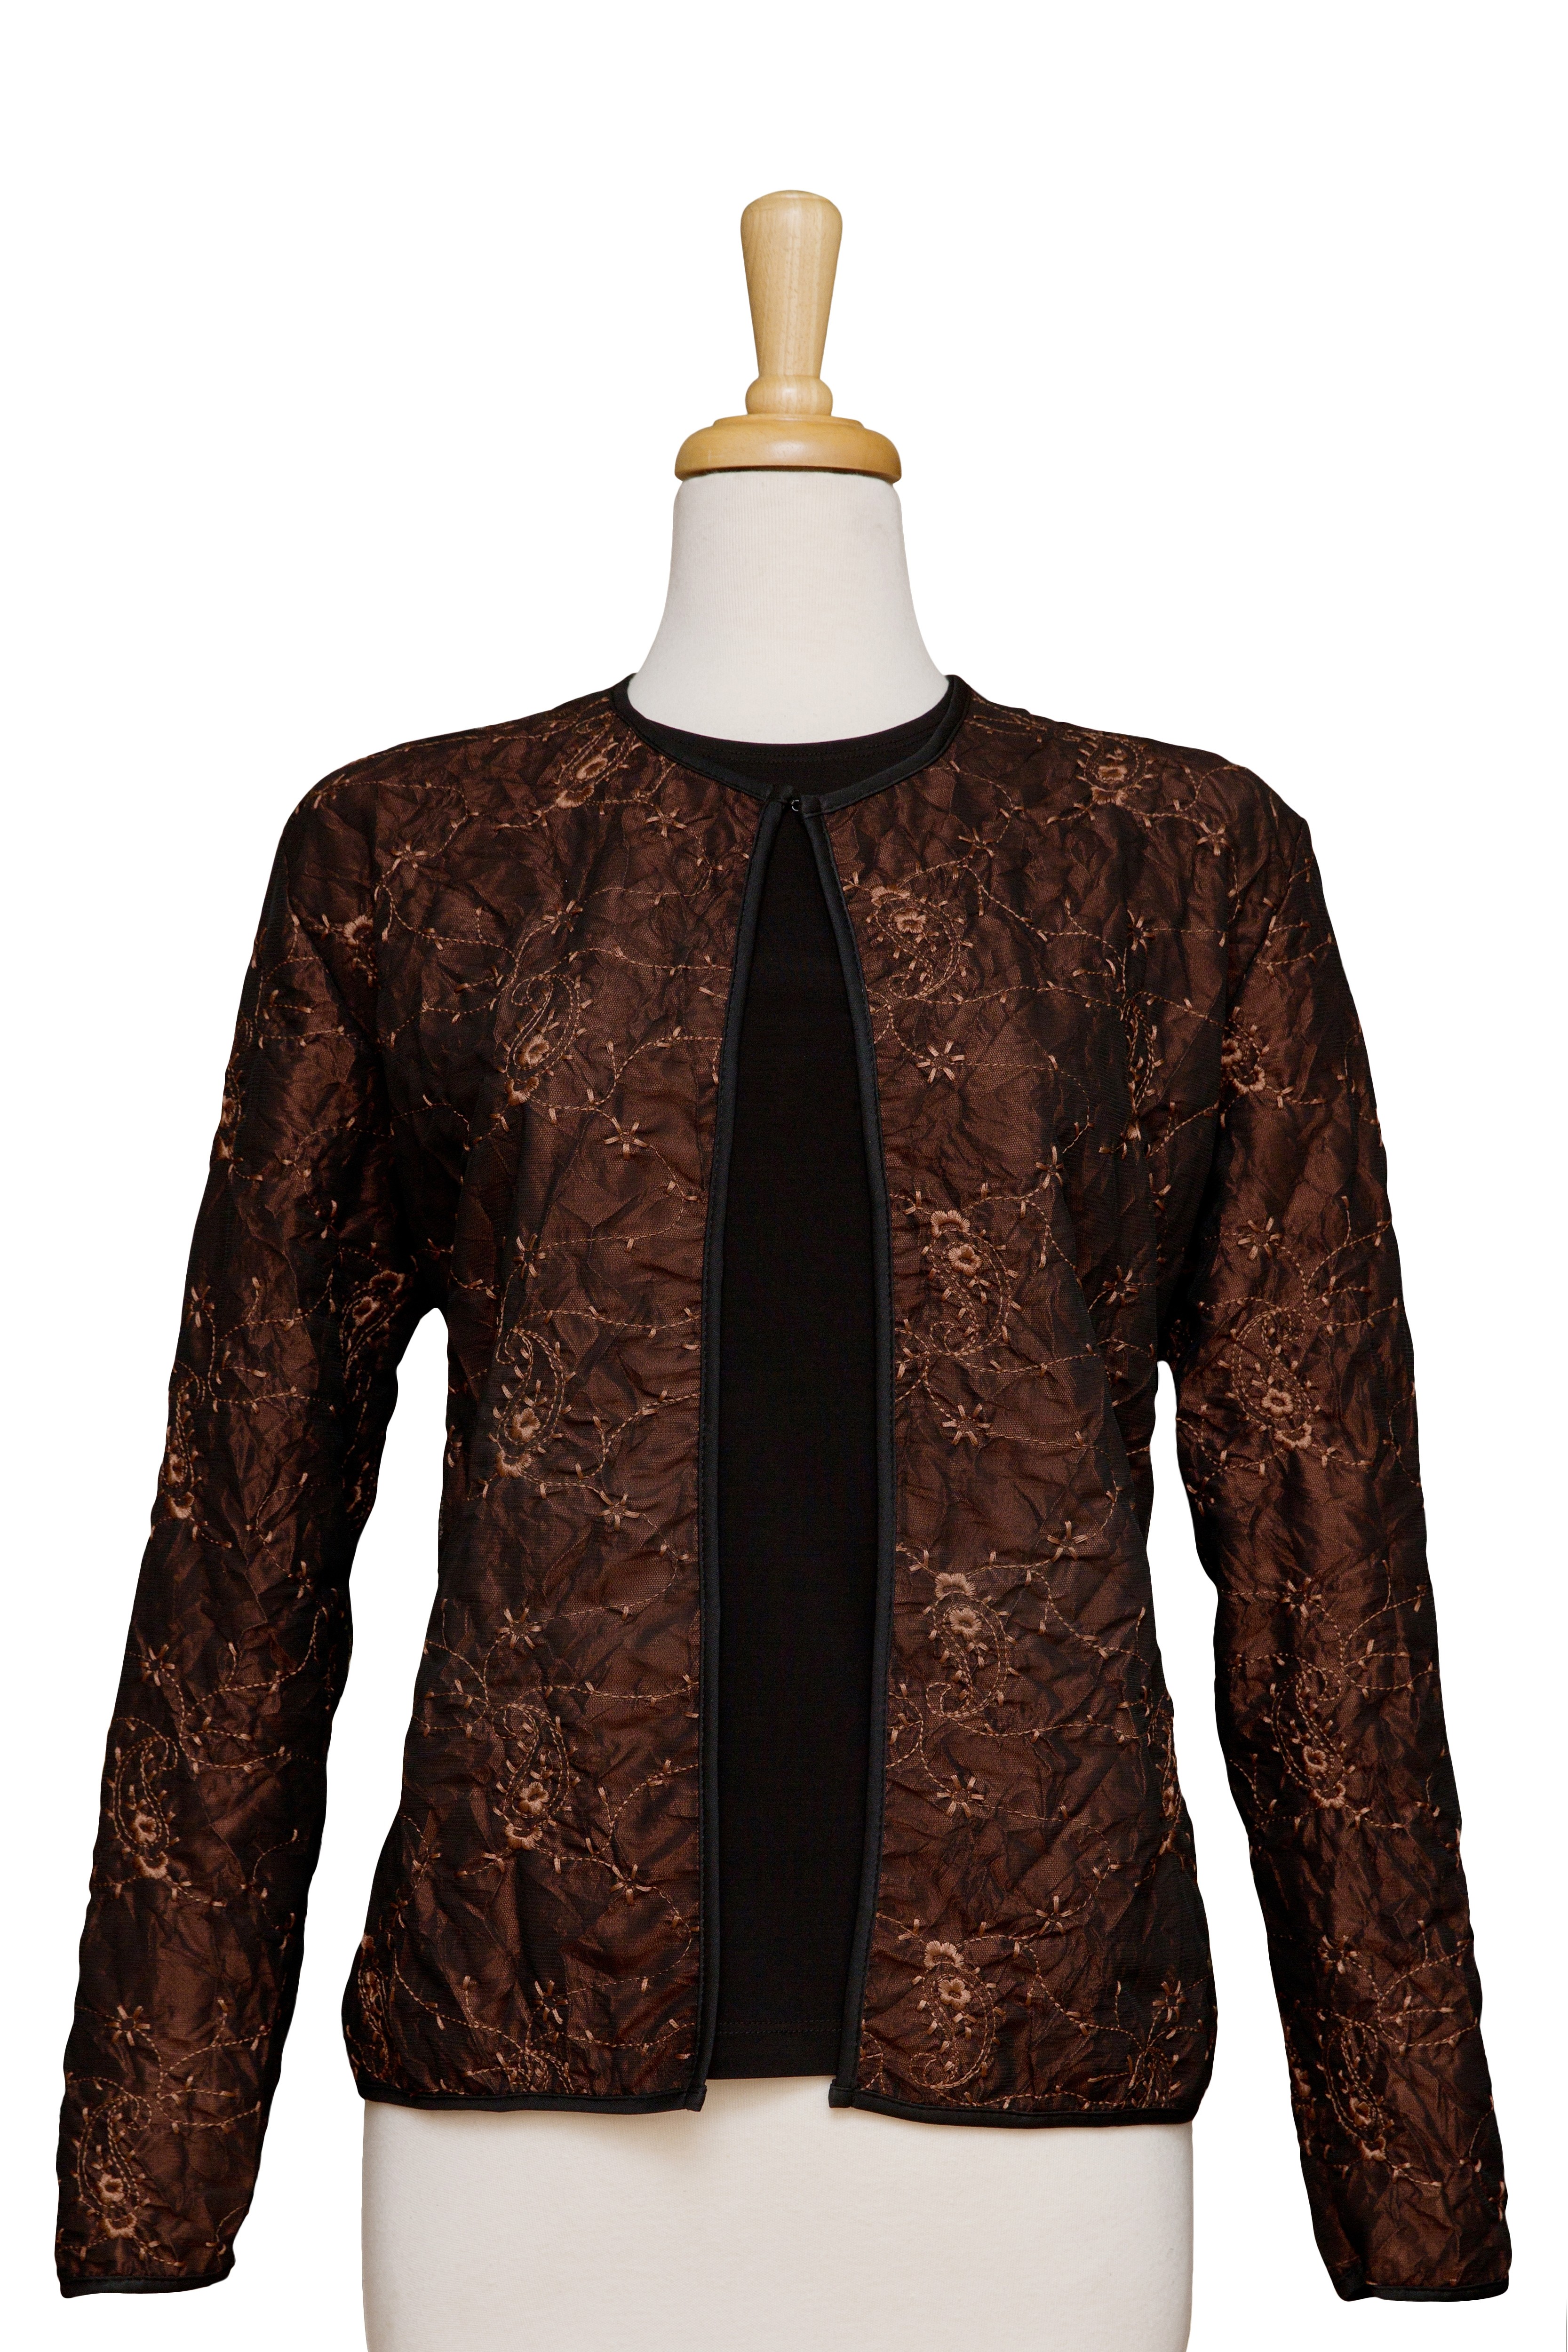 Two Piece Bronze and Black Crinkled Embroidered Paisley Set